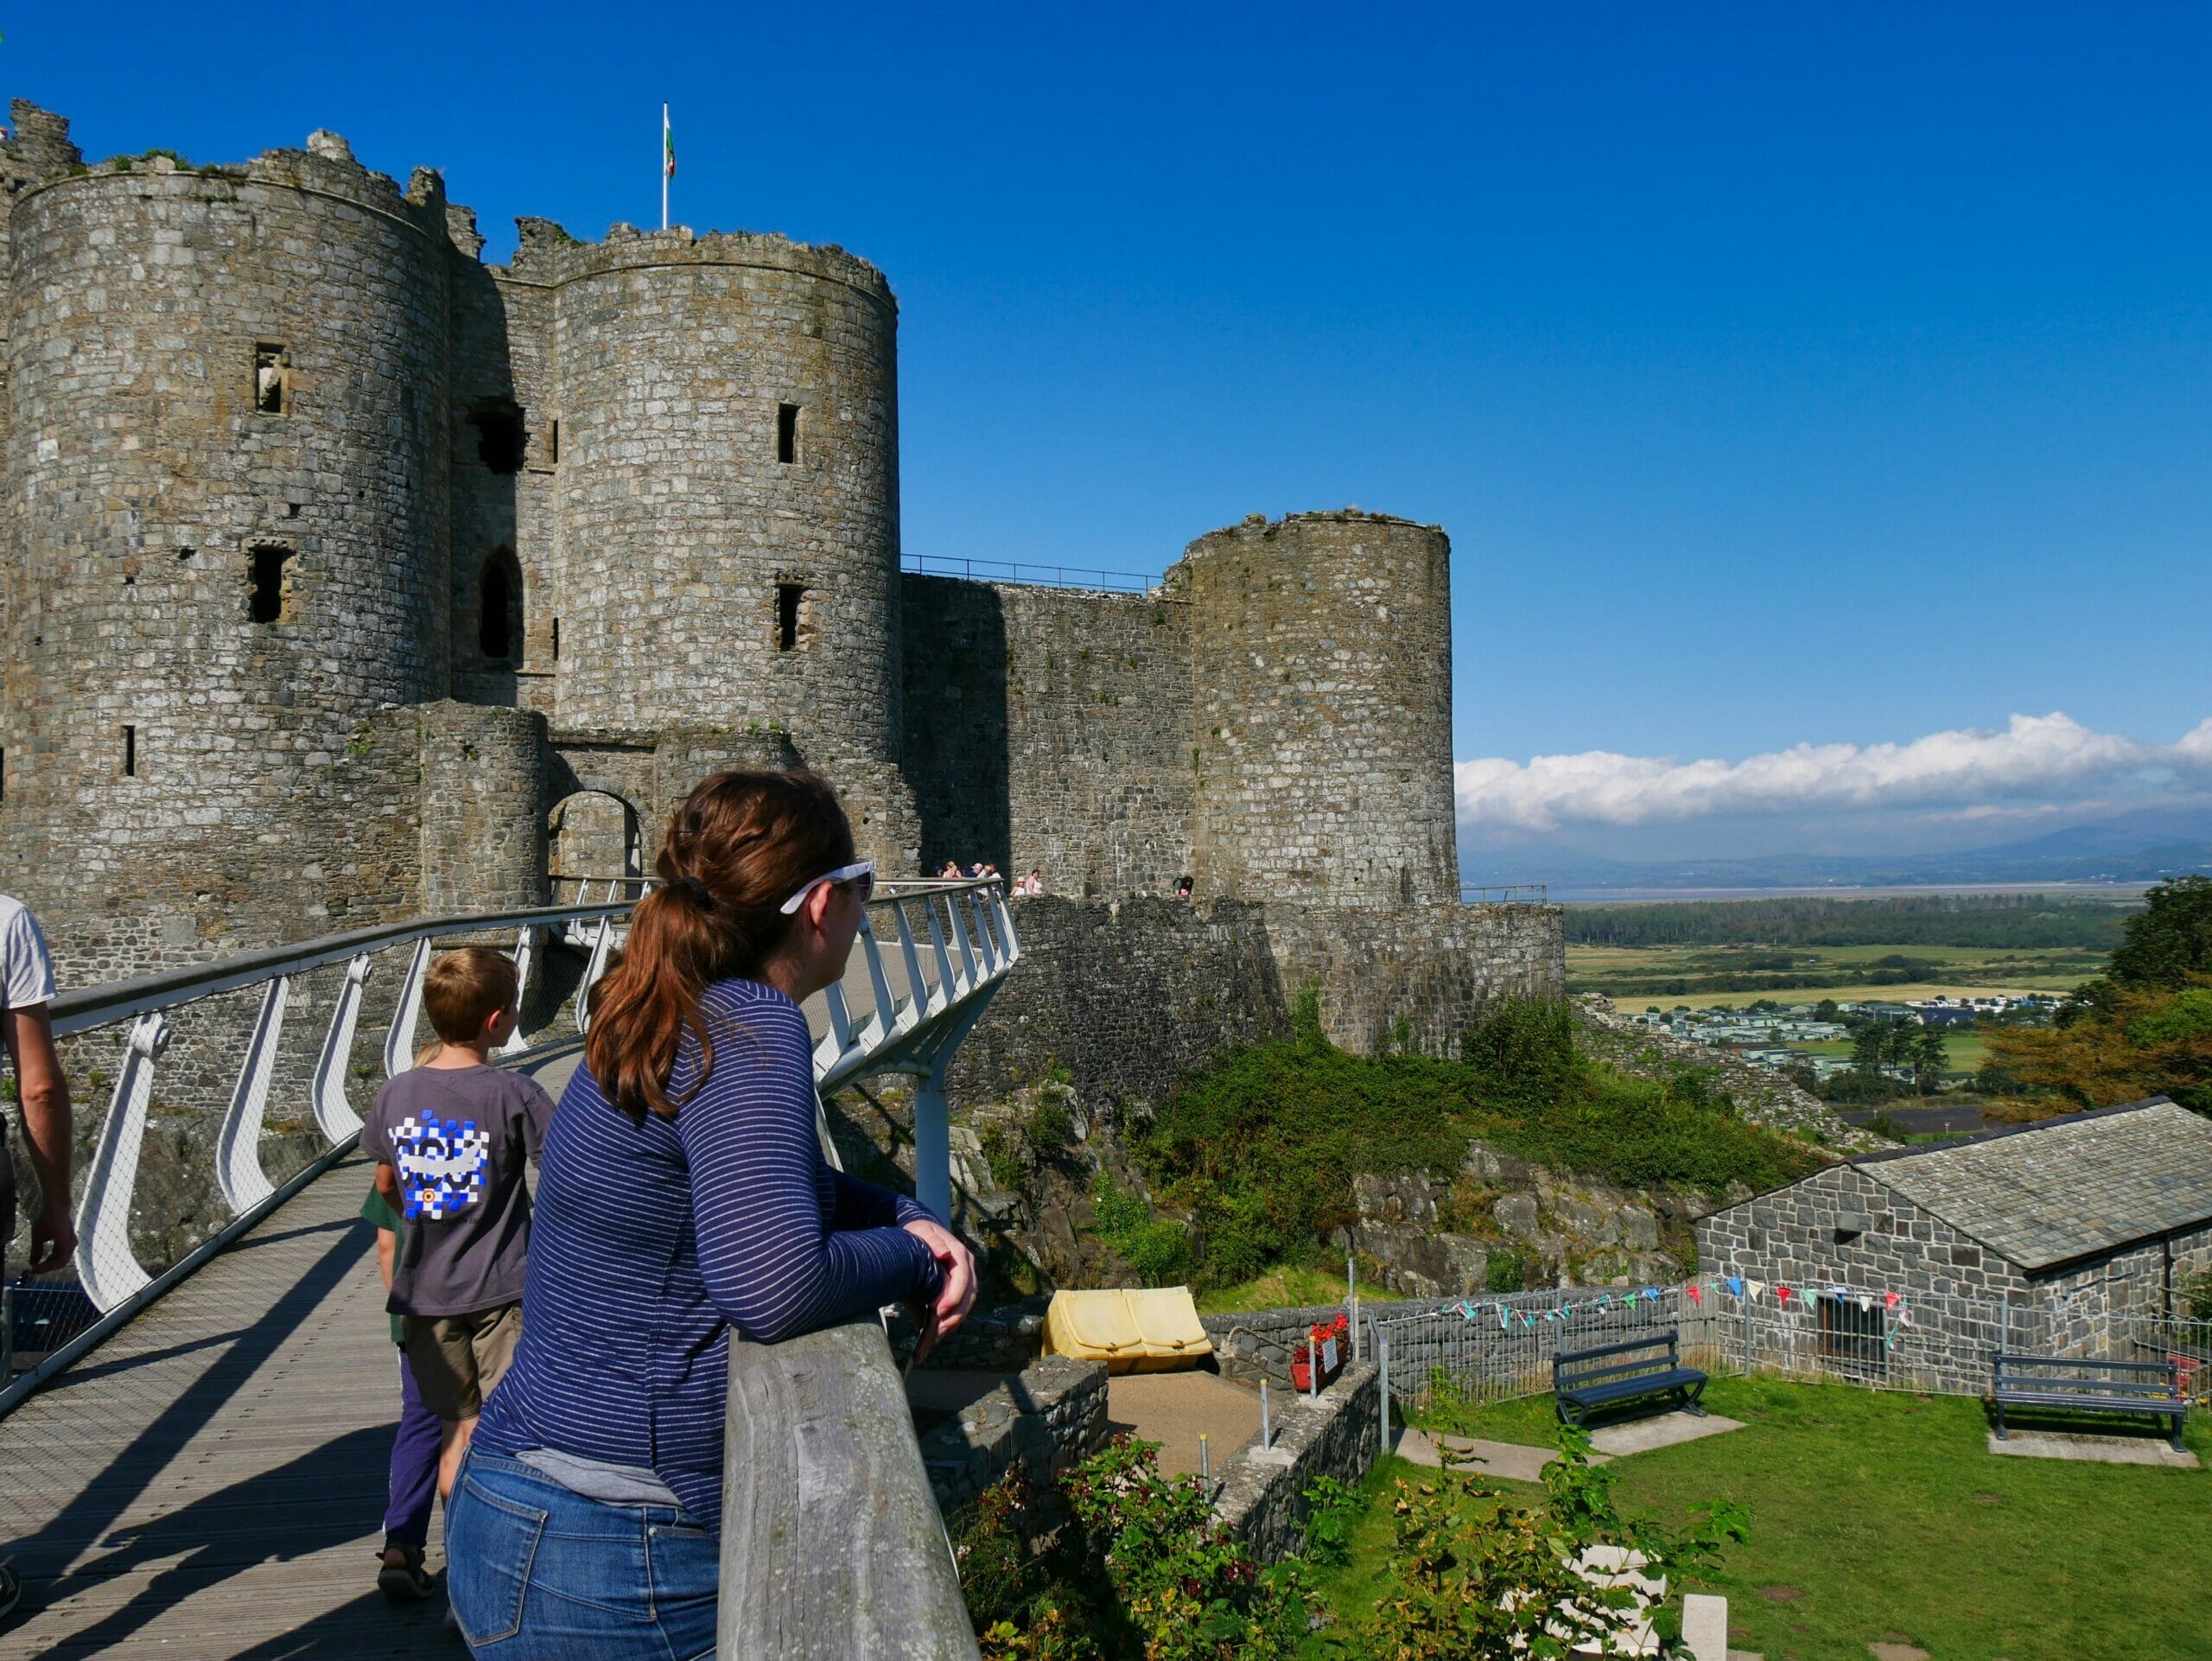 Kalyn looking out over the Welsh countryside from the bridge at Harlech Castle